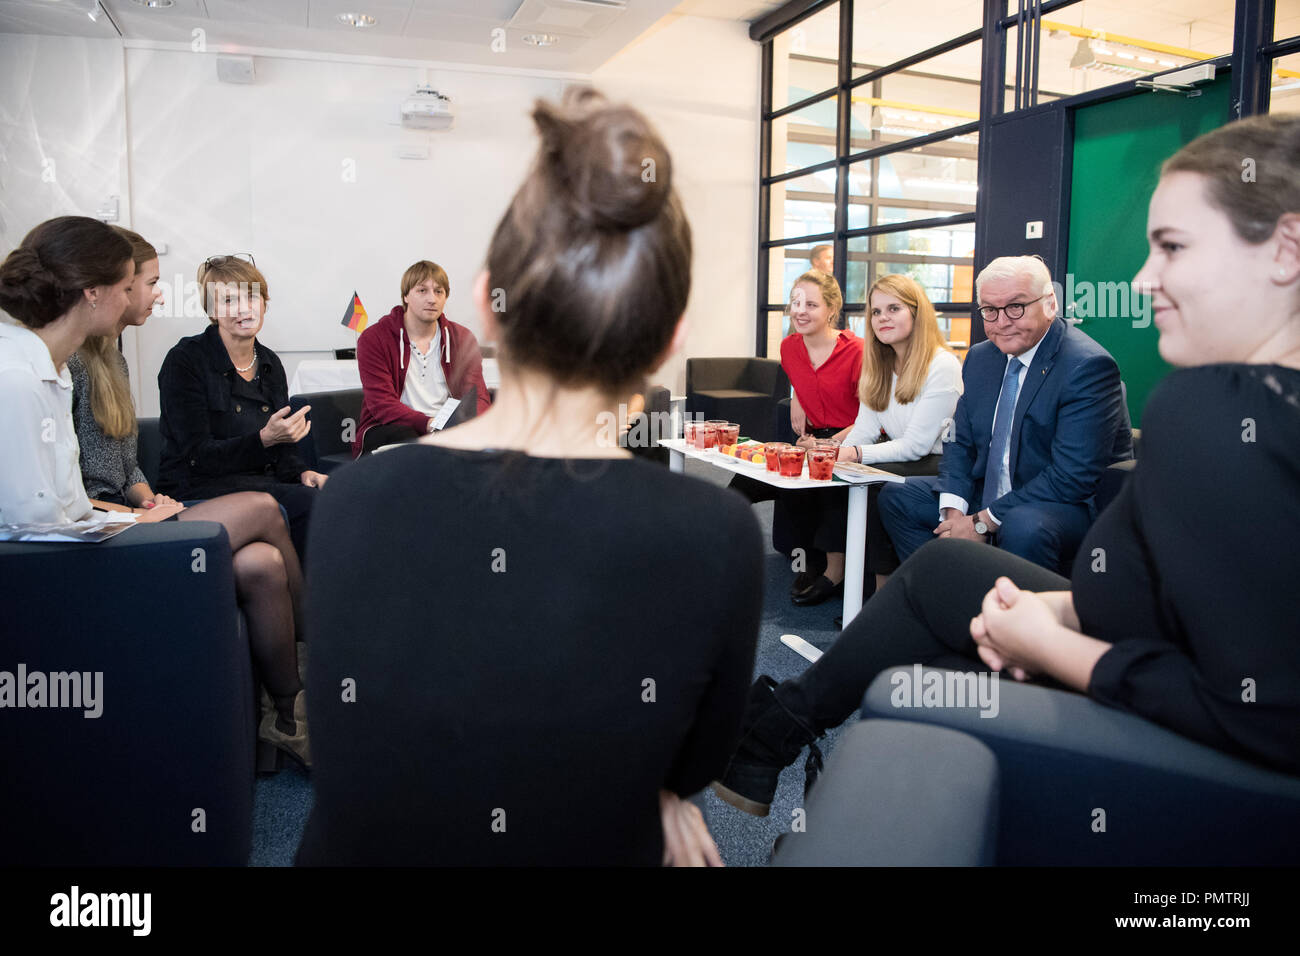 19 September 2018, Nordösterbotten, Oulu: Federal President Frank-Walter Steinmeier (2nd from right) and his wife Elke Büdenbender (3rd from left) visit the University of Oulu and talk to German students studying in Oulu. President Steinmeier and his wife Elke are on a three-day state visit to Finland. Photo: Bernd von Jutrczenka/dpa Stock Photo